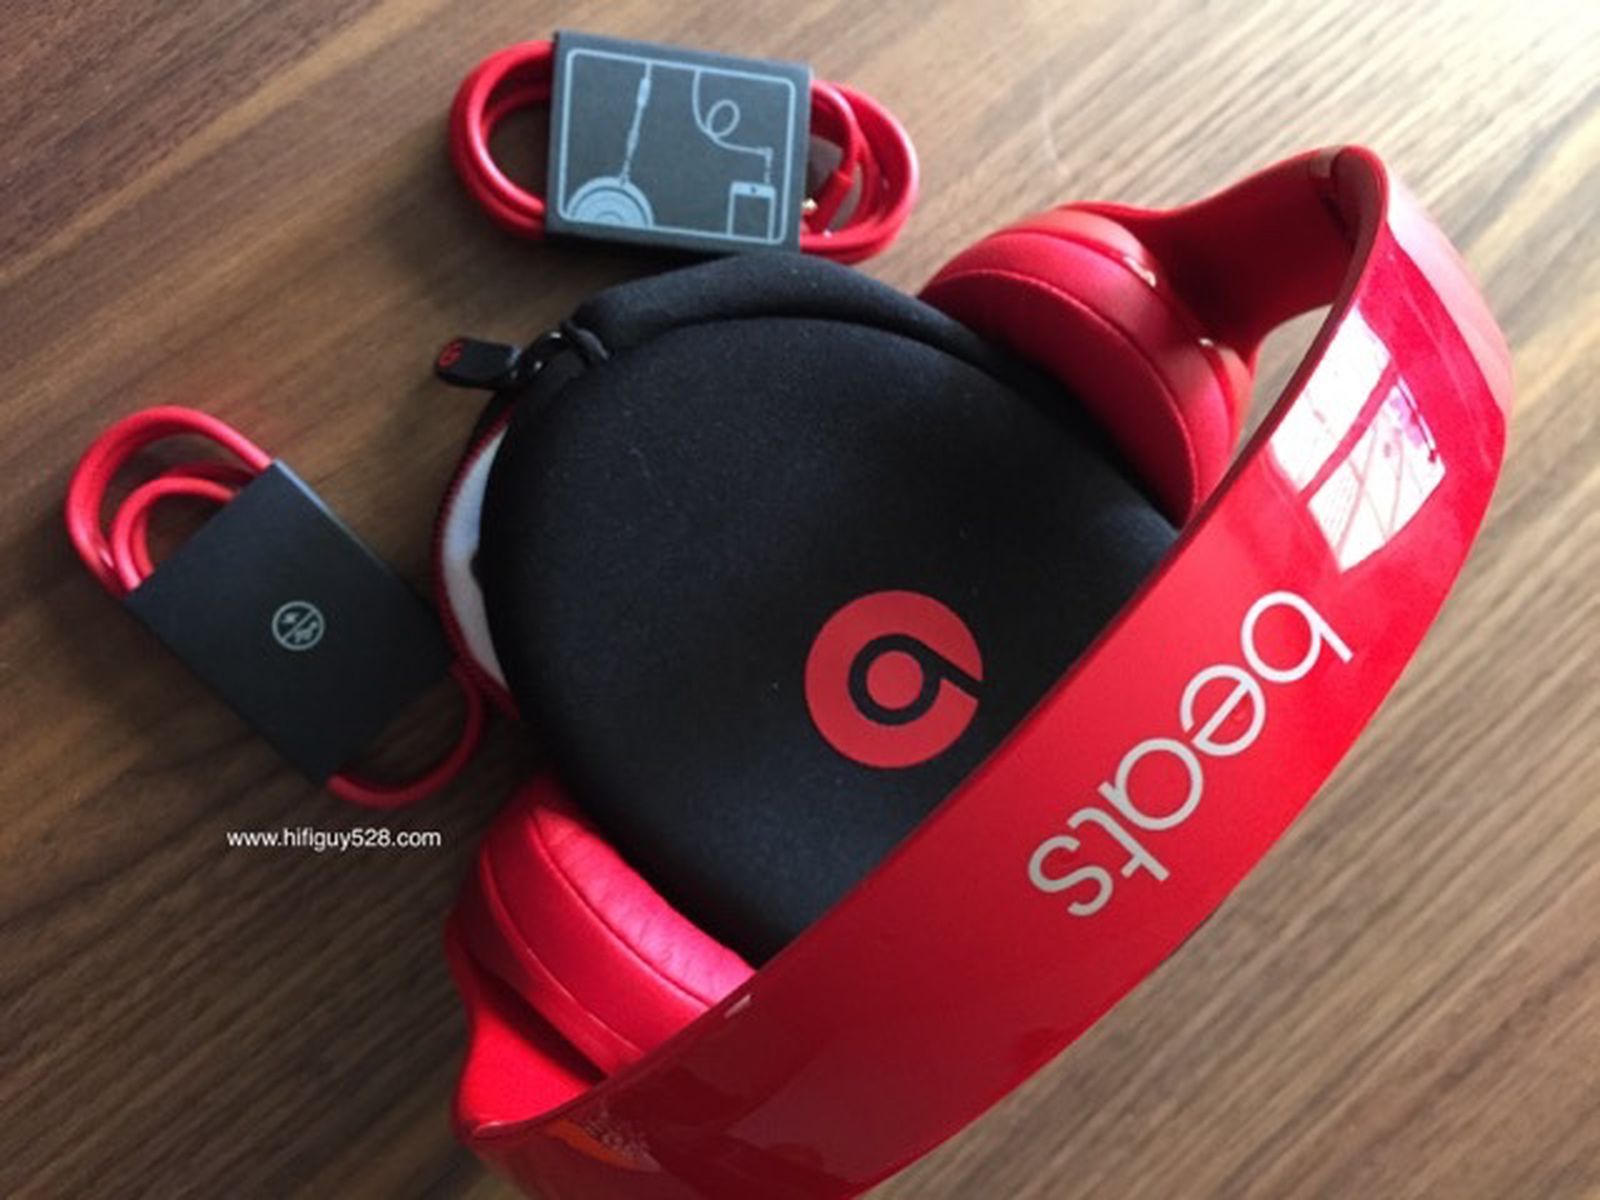 First Look at the New Beats Solo2 Wireless Headphones - MacRumors